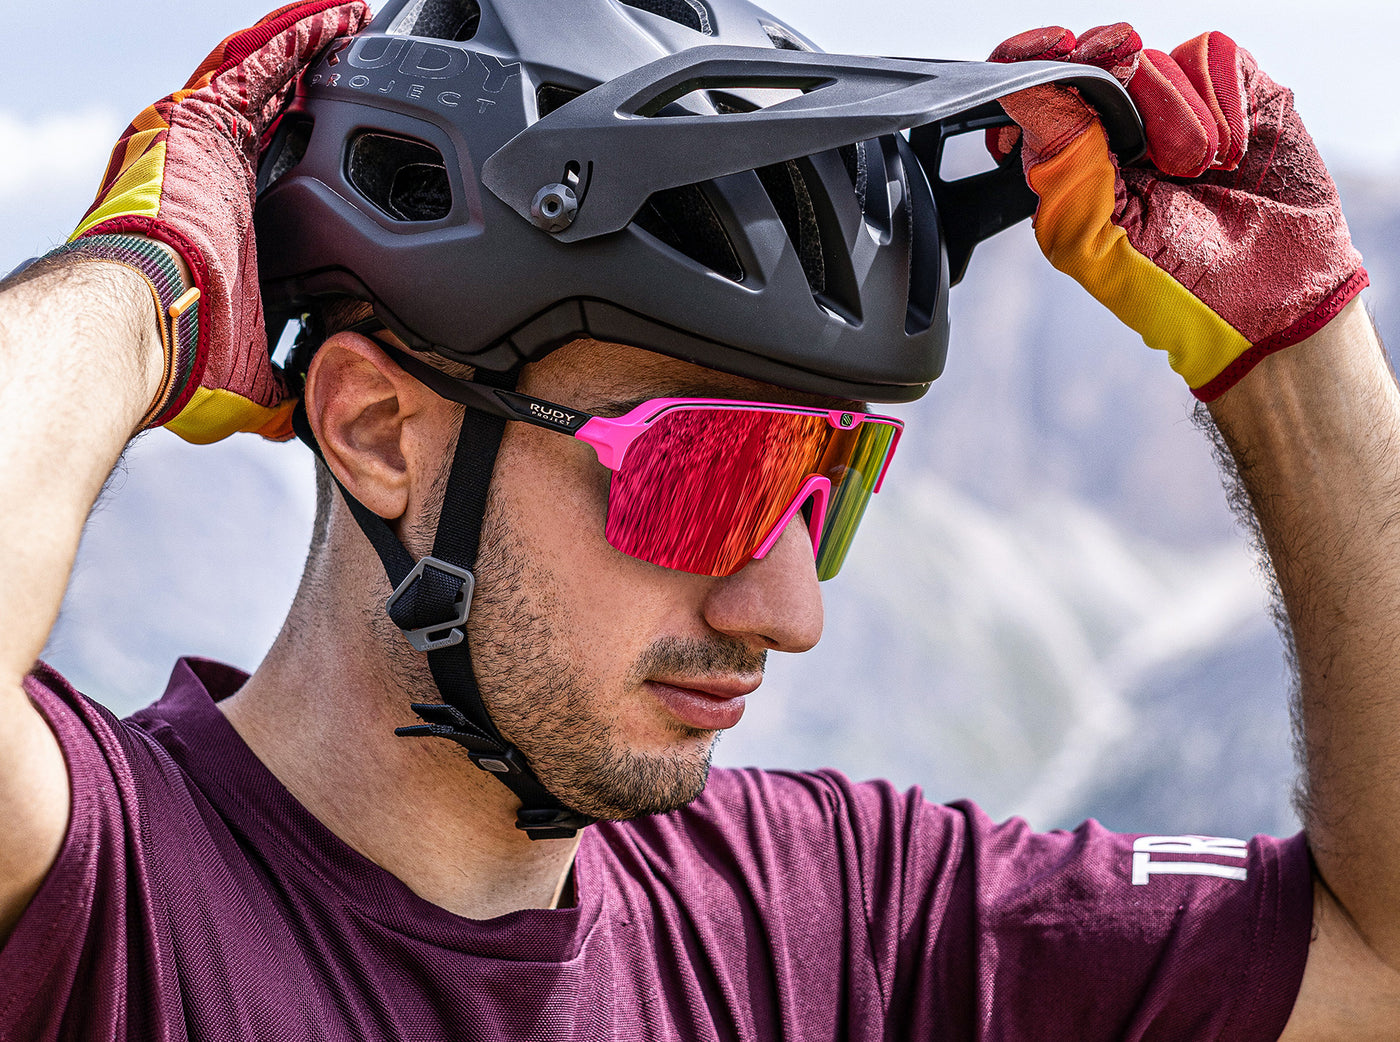 Rudy Project Spinshield Air sunglasses and Protera+ bike helmet worn by mountain biker